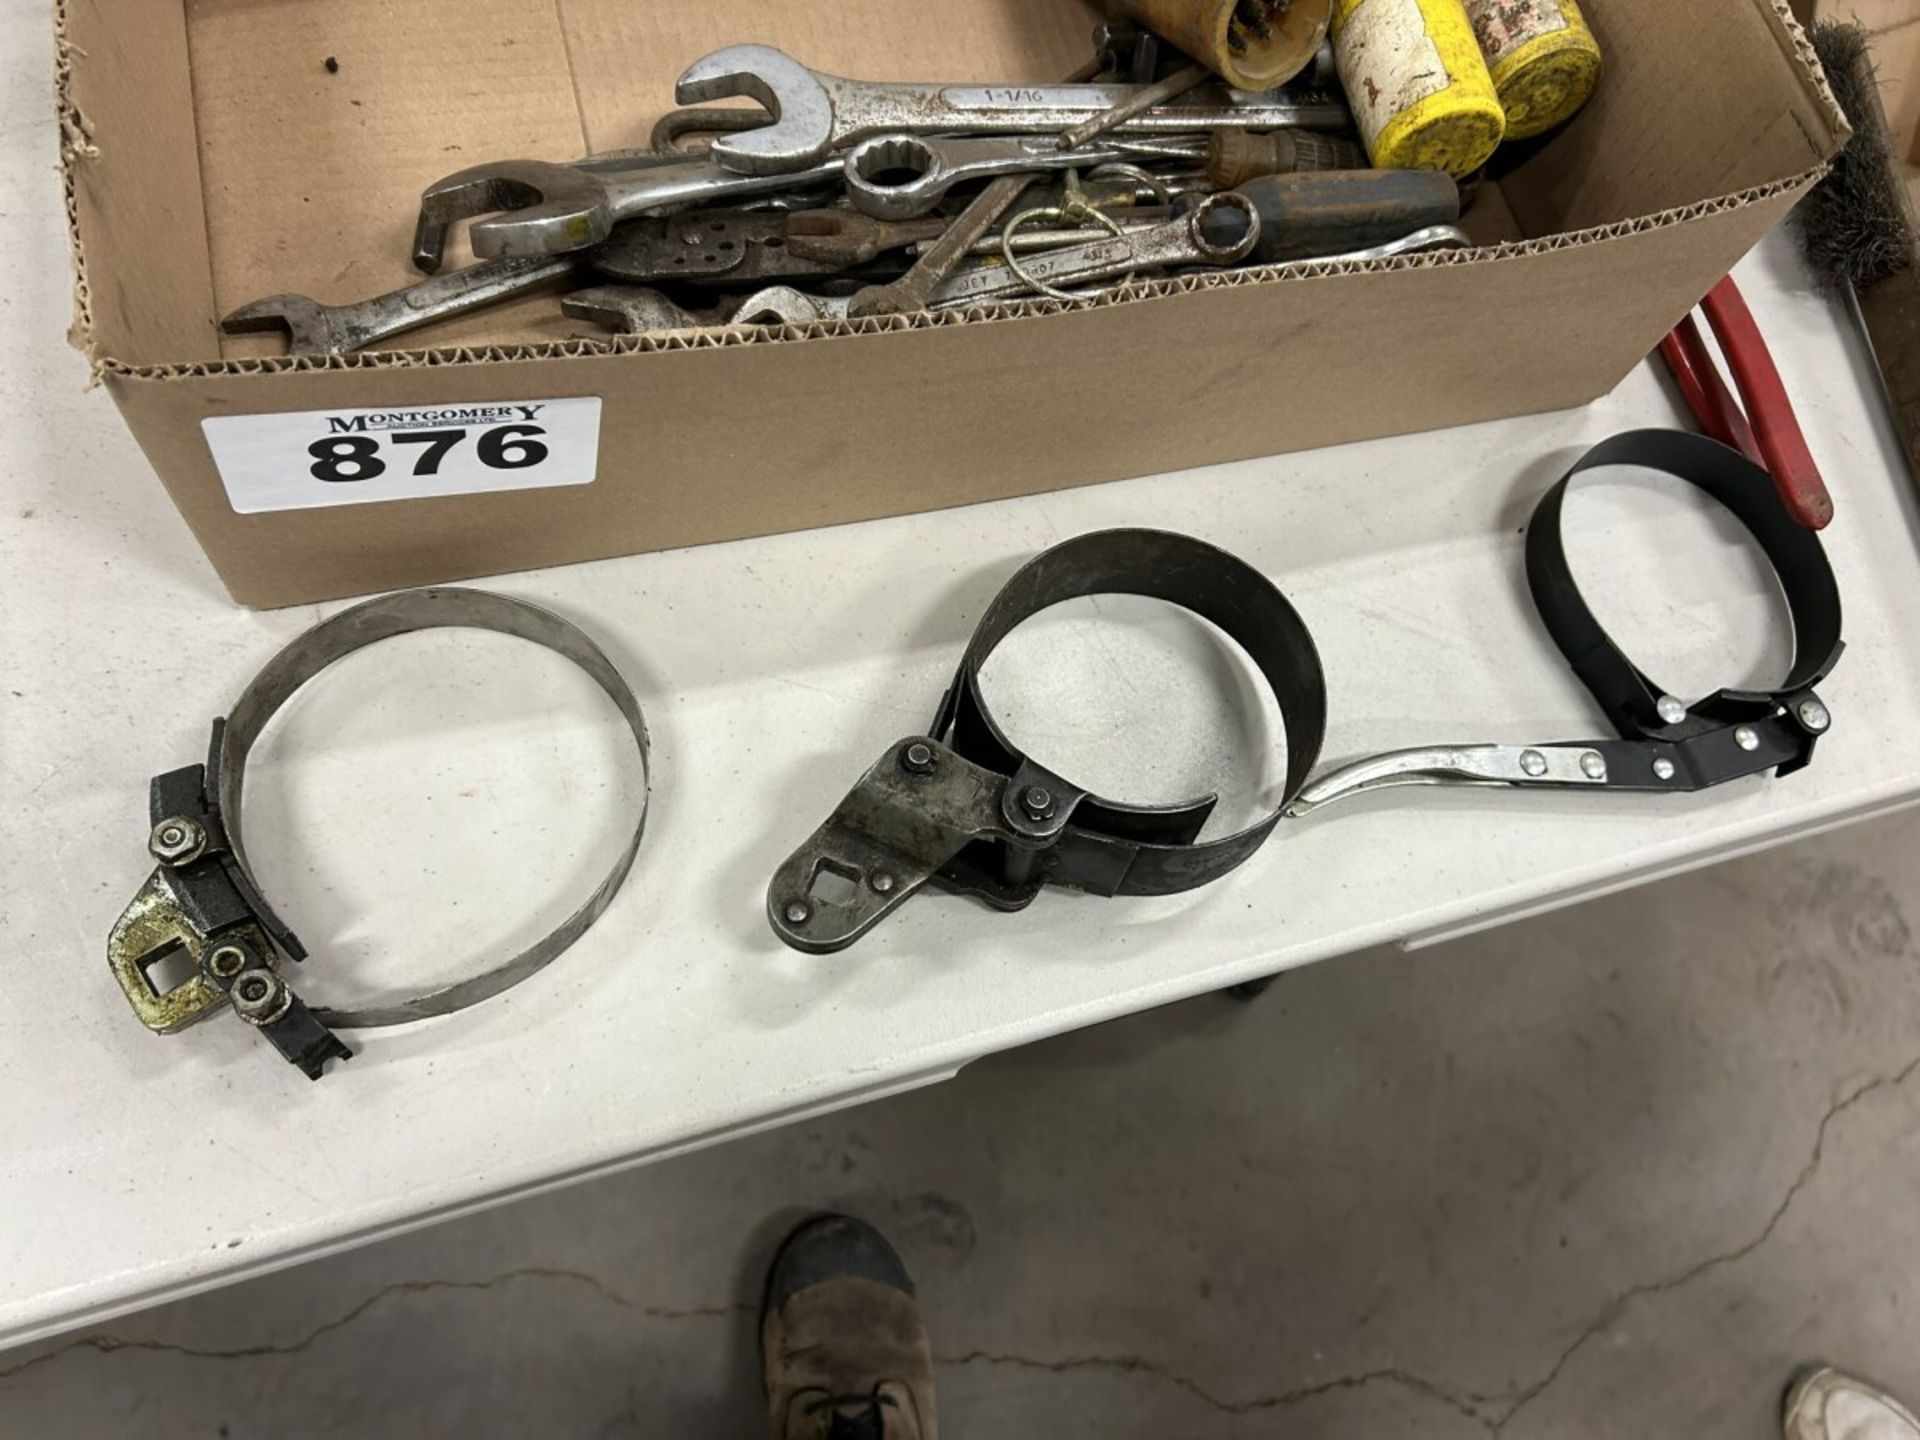 L/O HAND TOOLS OIL FILTER WRENCH, WRENCHES, SPARK PLUG PLIERS, TERMINAL CLEANERS ETC. - Image 6 of 8